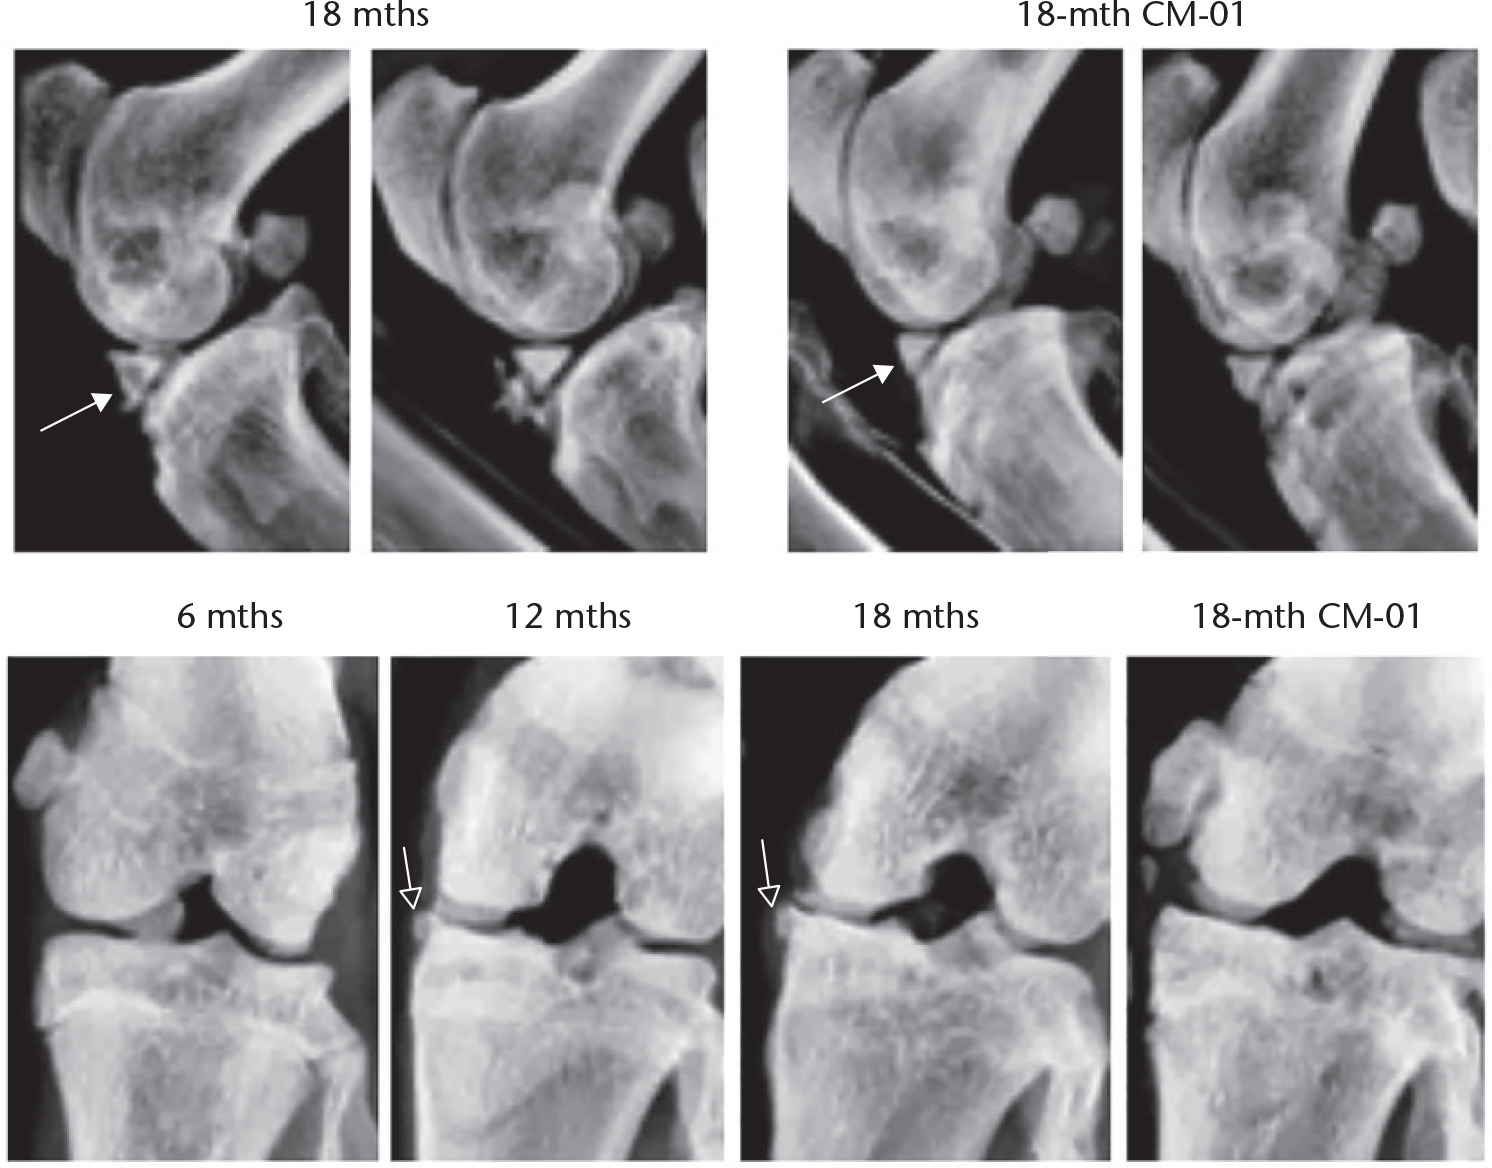 Fig. 1 
            Radiographs of knee joints. Carolinas Molecule-01 (CM-01) reduced the sizes of calcified anterior horn of menisci and the sizes of osteophyte. Solid arrows, calcified anterior horn of the menisci; hollow arrows, osteophytes.
          